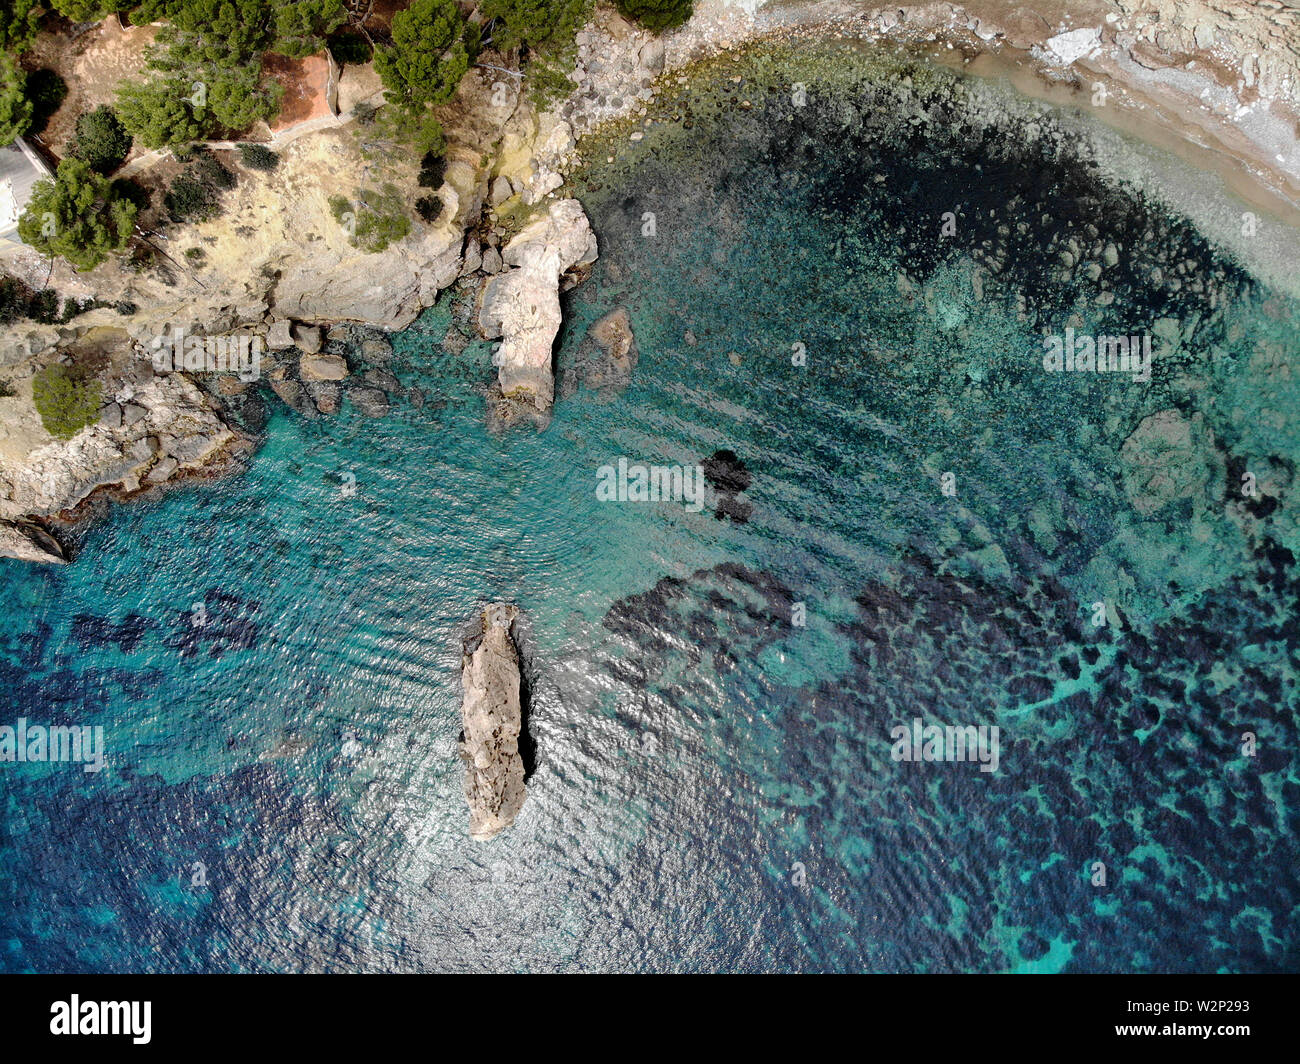 Cala en Cranc rocky seaside in the Palma de Majorca directly from above drone point of view photo, picturesque nature stony beach turquoise sea Stock Photo